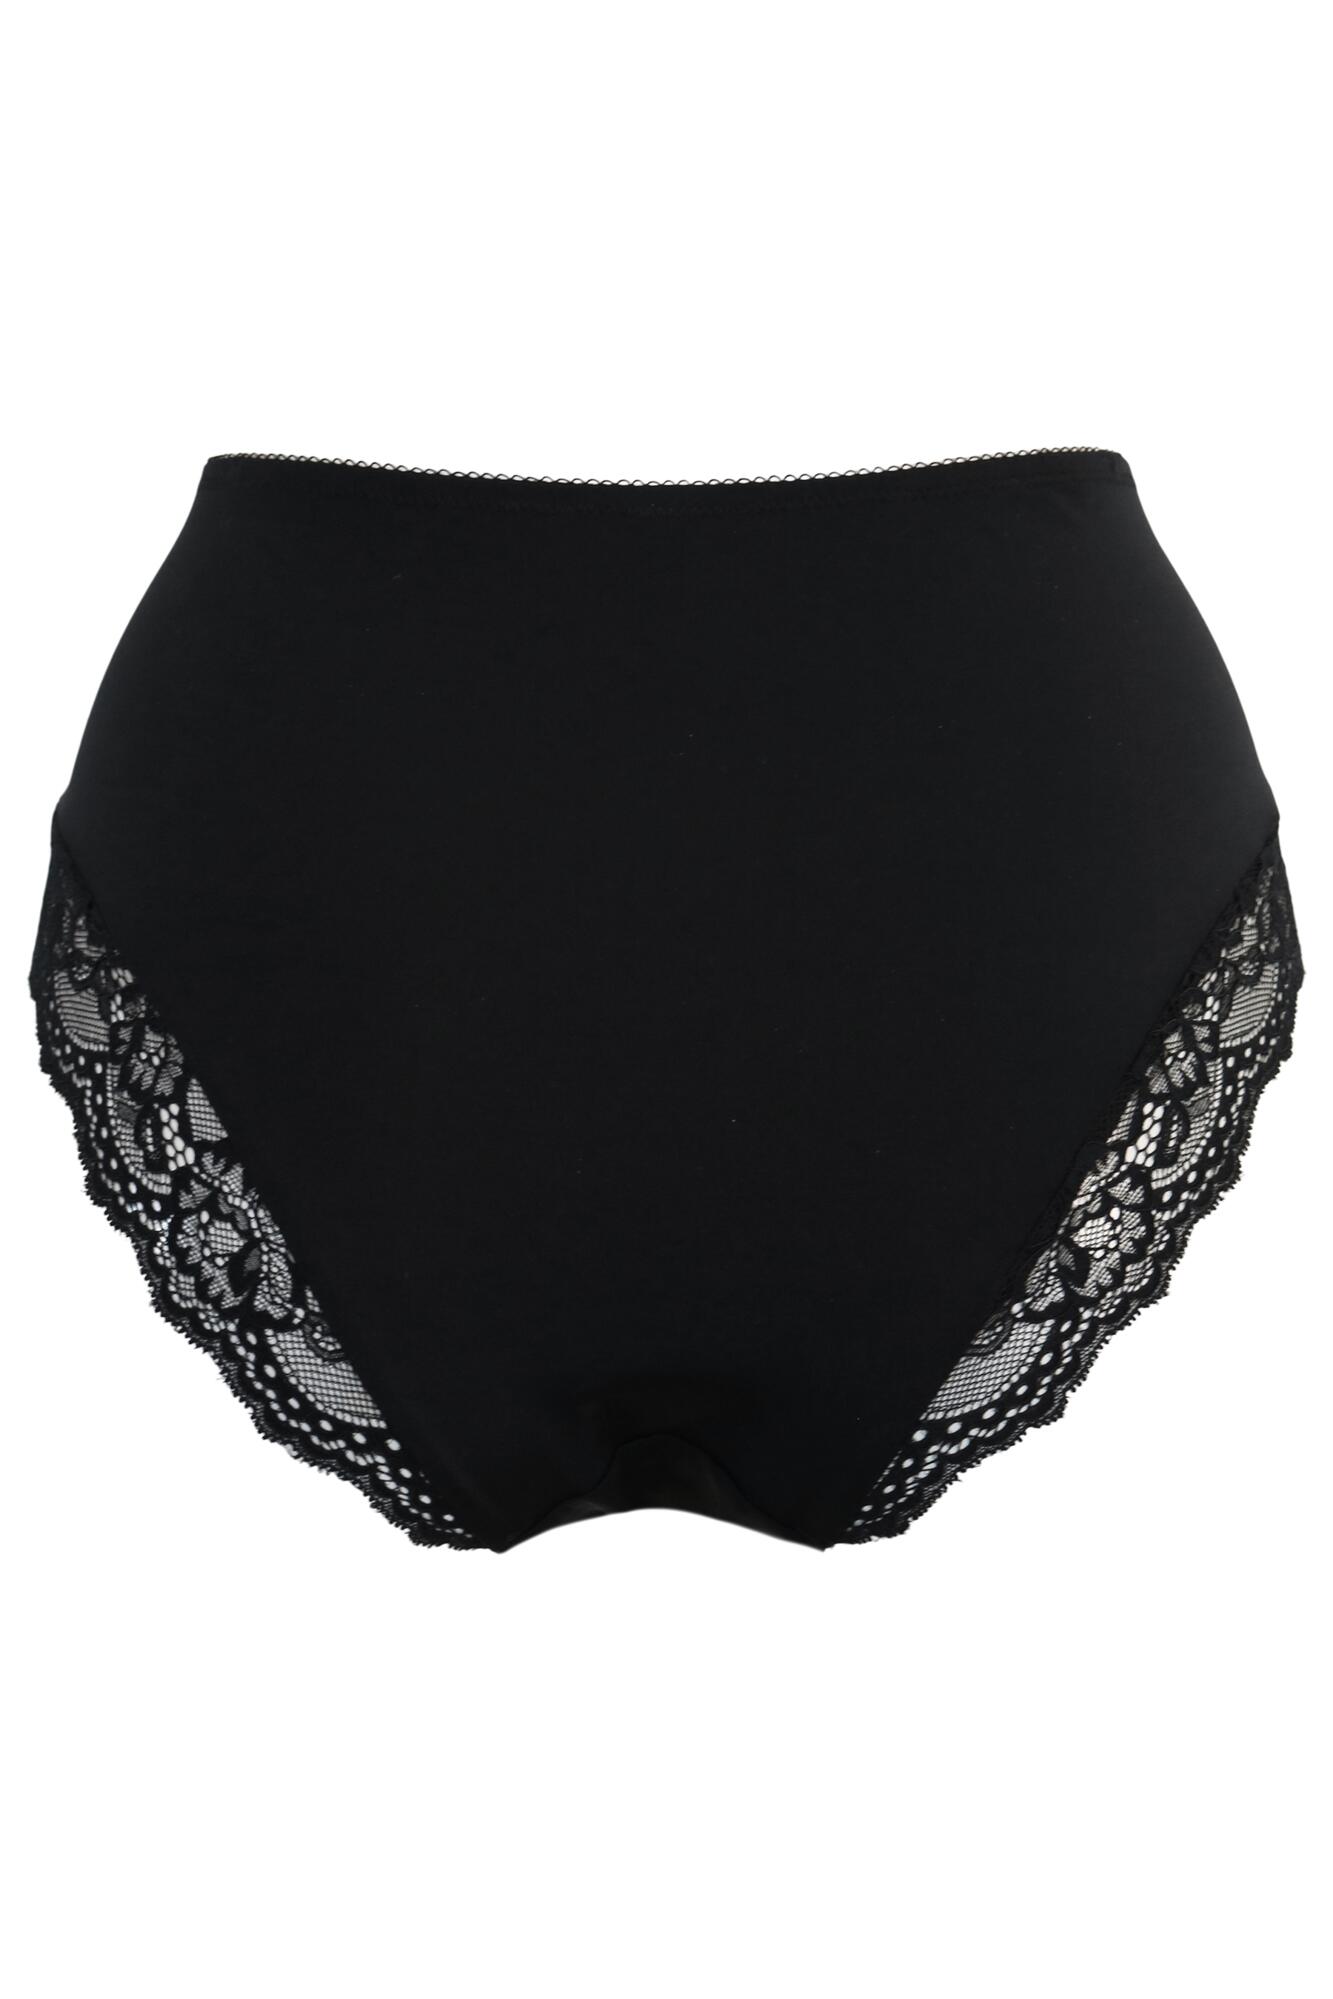 Mesh and Lace Deep Brief, Black